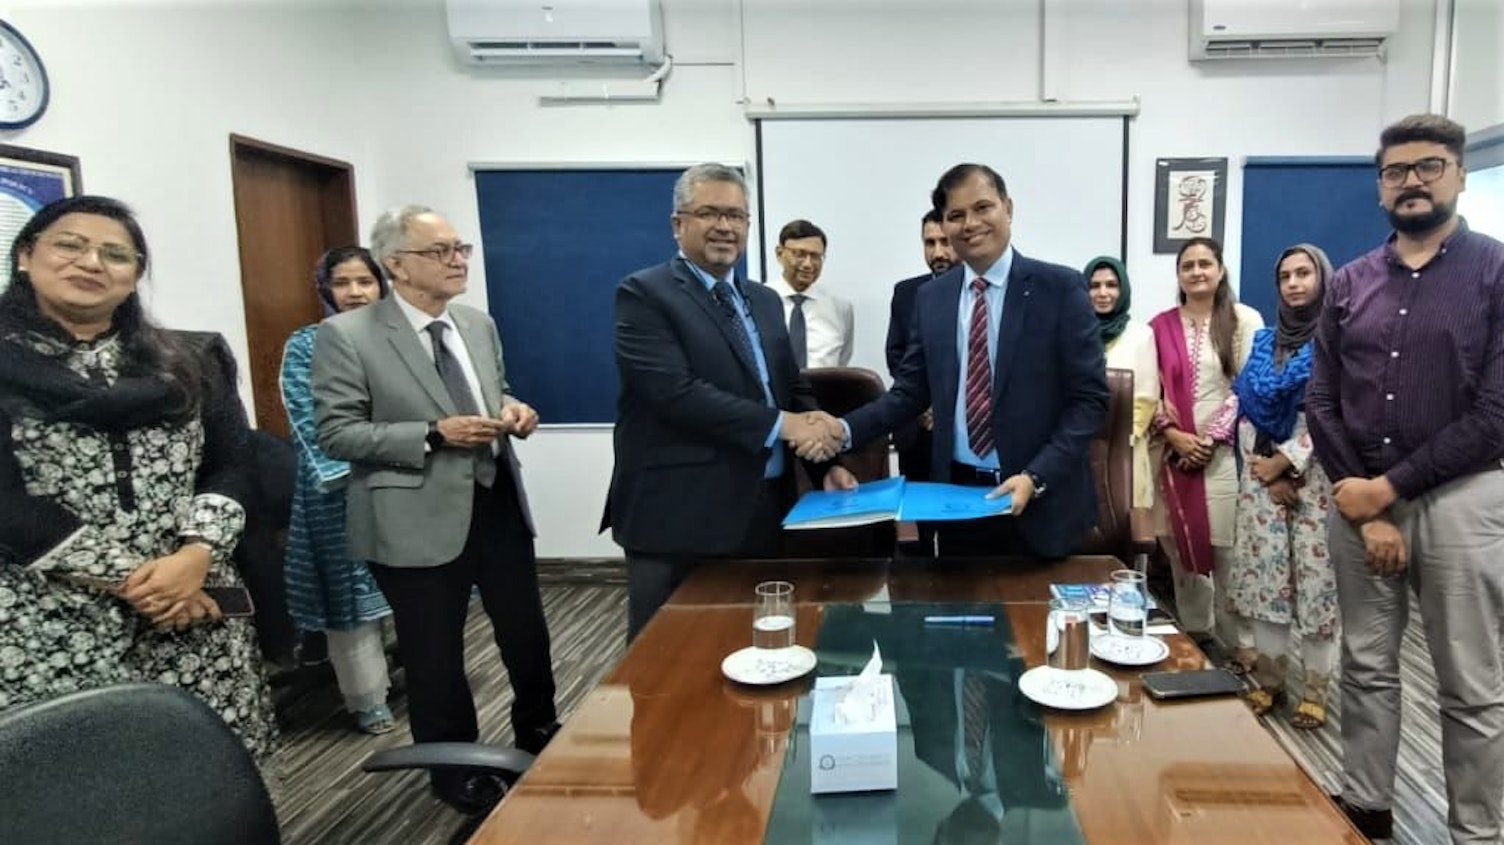 SGS Pakistan Enters in Strategic Collaboration with DUHS to Develop Health Science Services